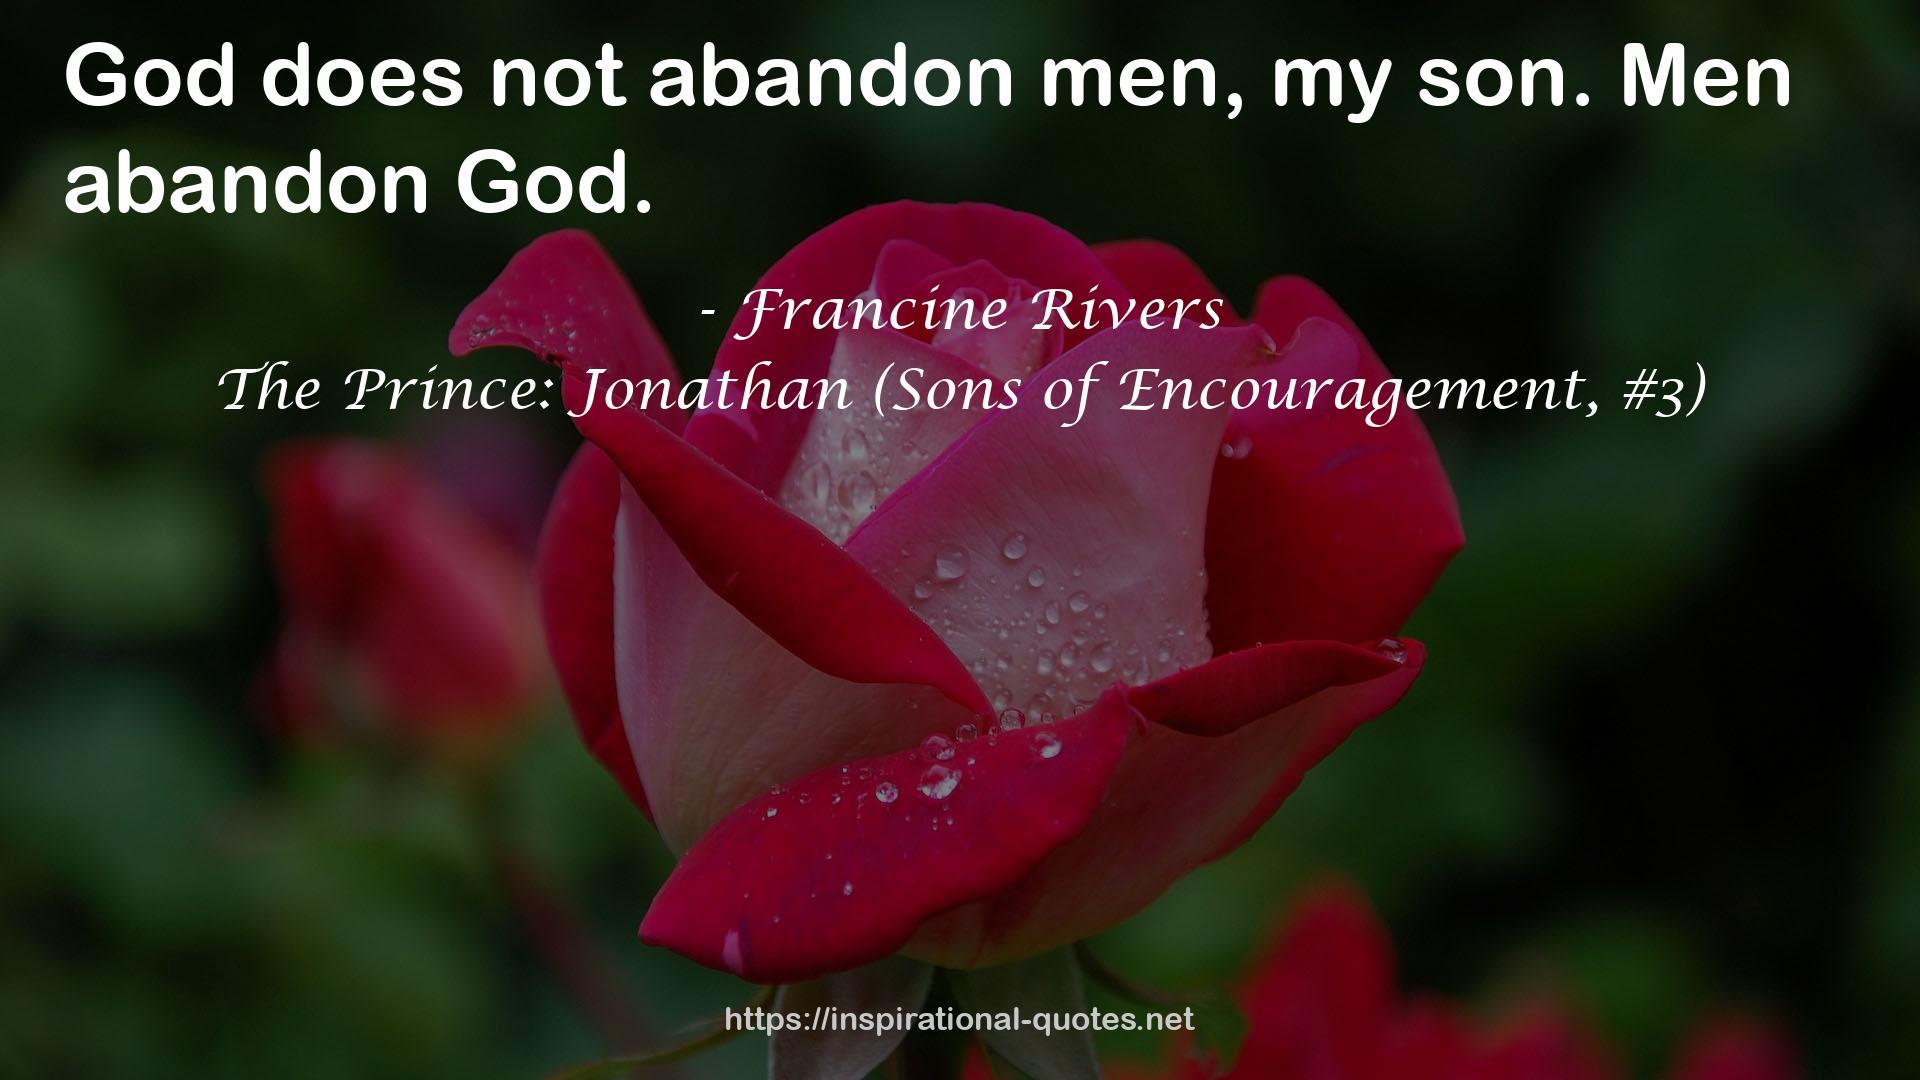 The Prince: Jonathan (Sons of Encouragement, #3) QUOTES